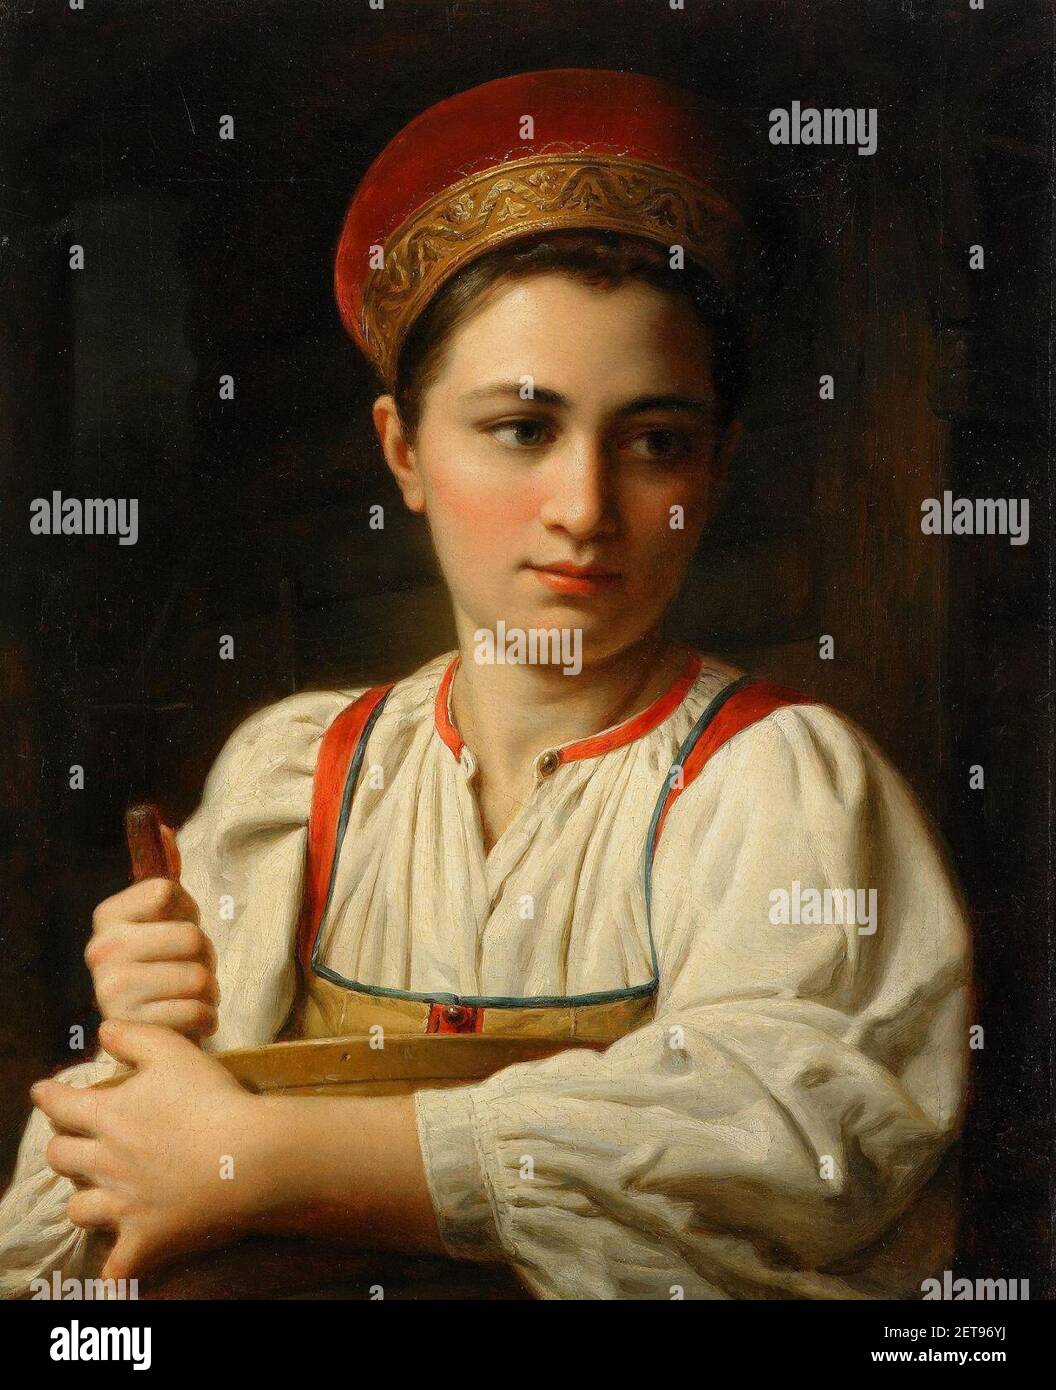 Peasant girl by anonimous (Russia, 19 c., priv.coll.). Stock Photo